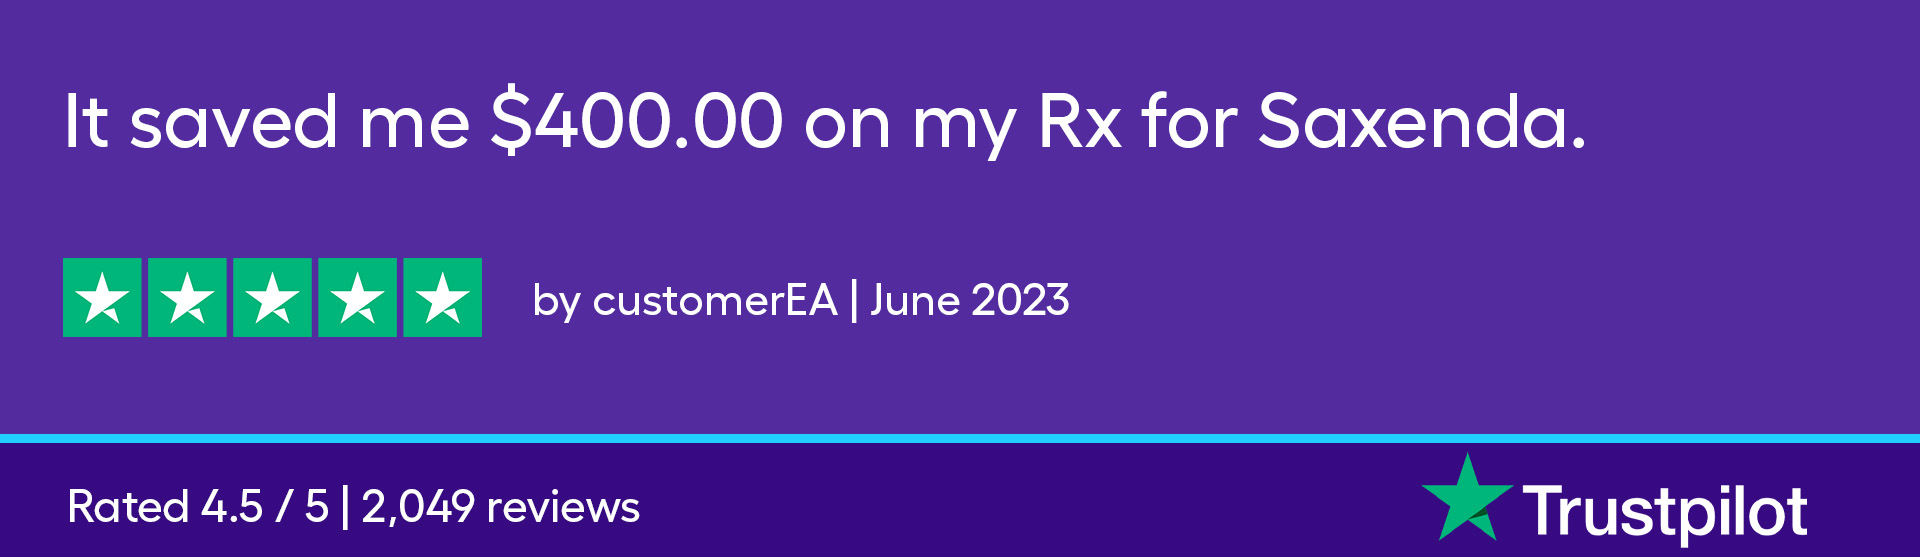 It saved me $400.00 on my Rx for Saxenda